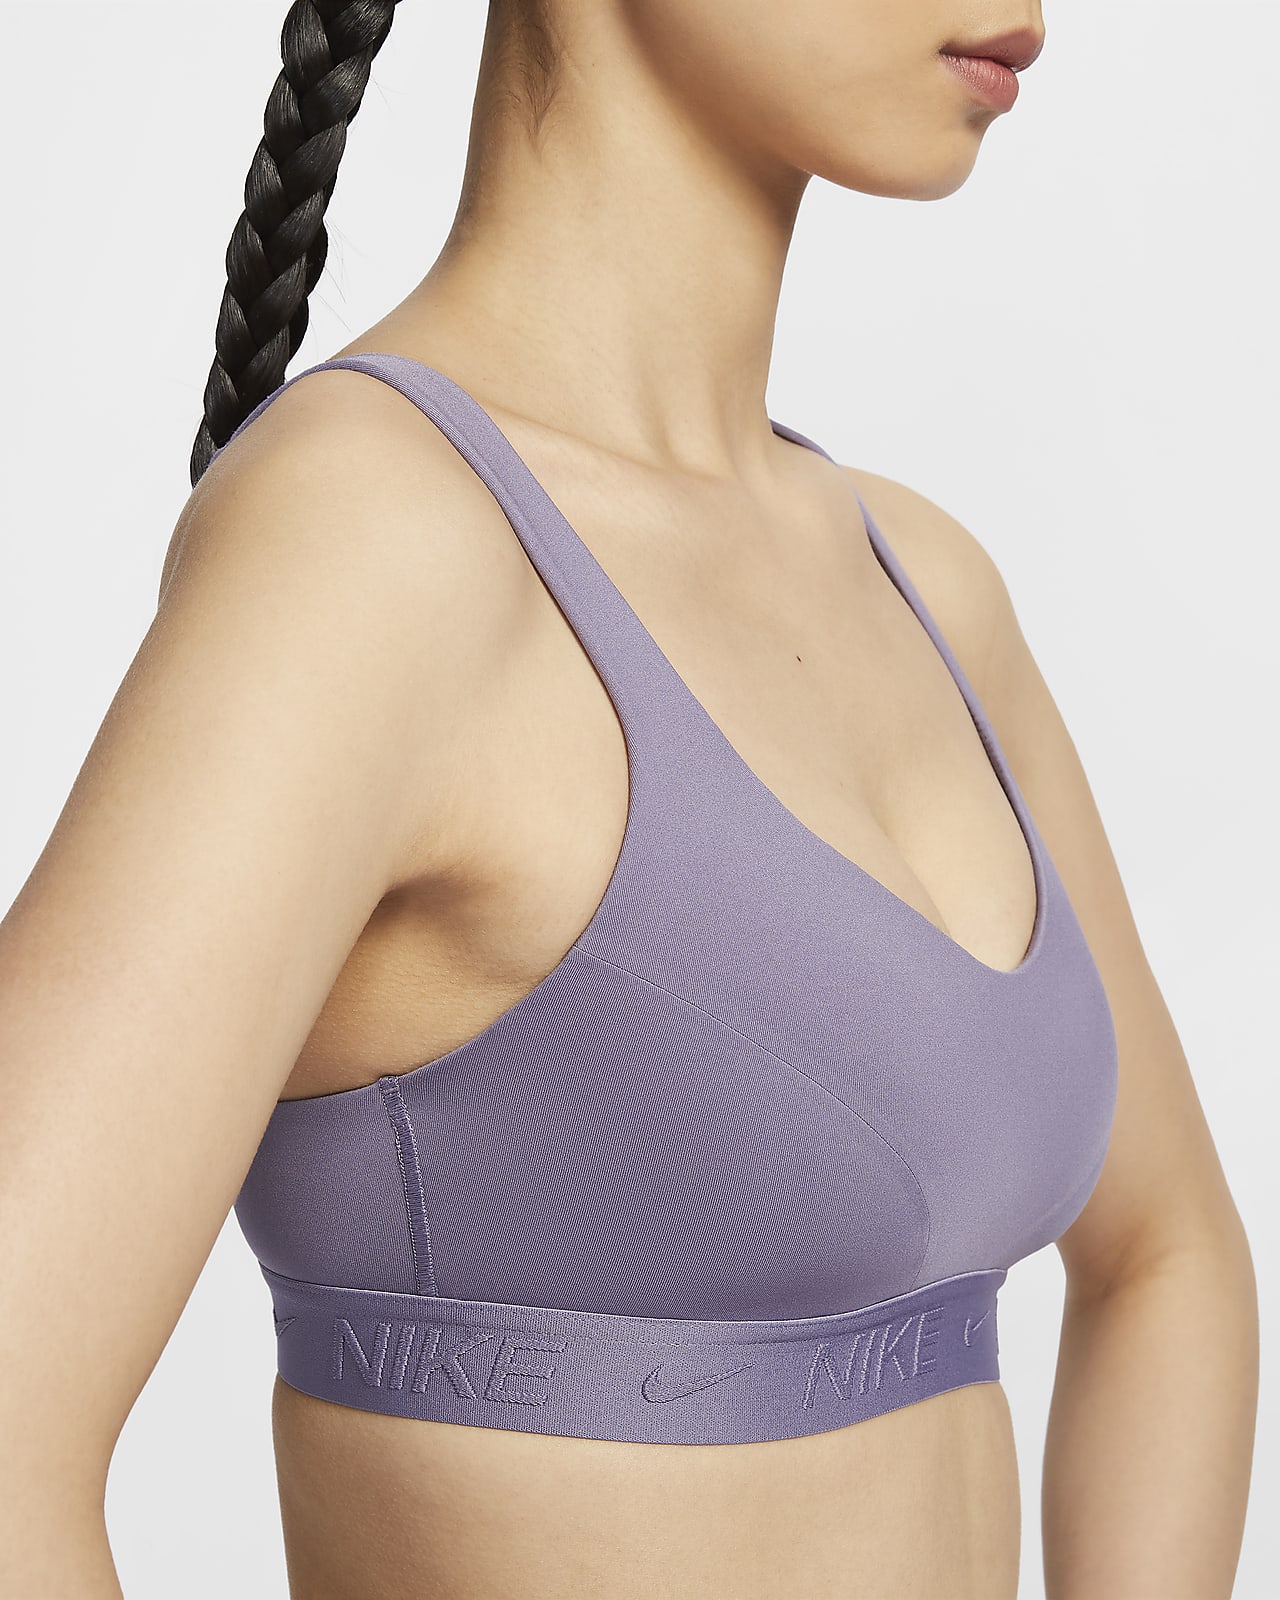 Nike Indy Women's Light-Support Padded Graphic Sports Bra. Nike ID